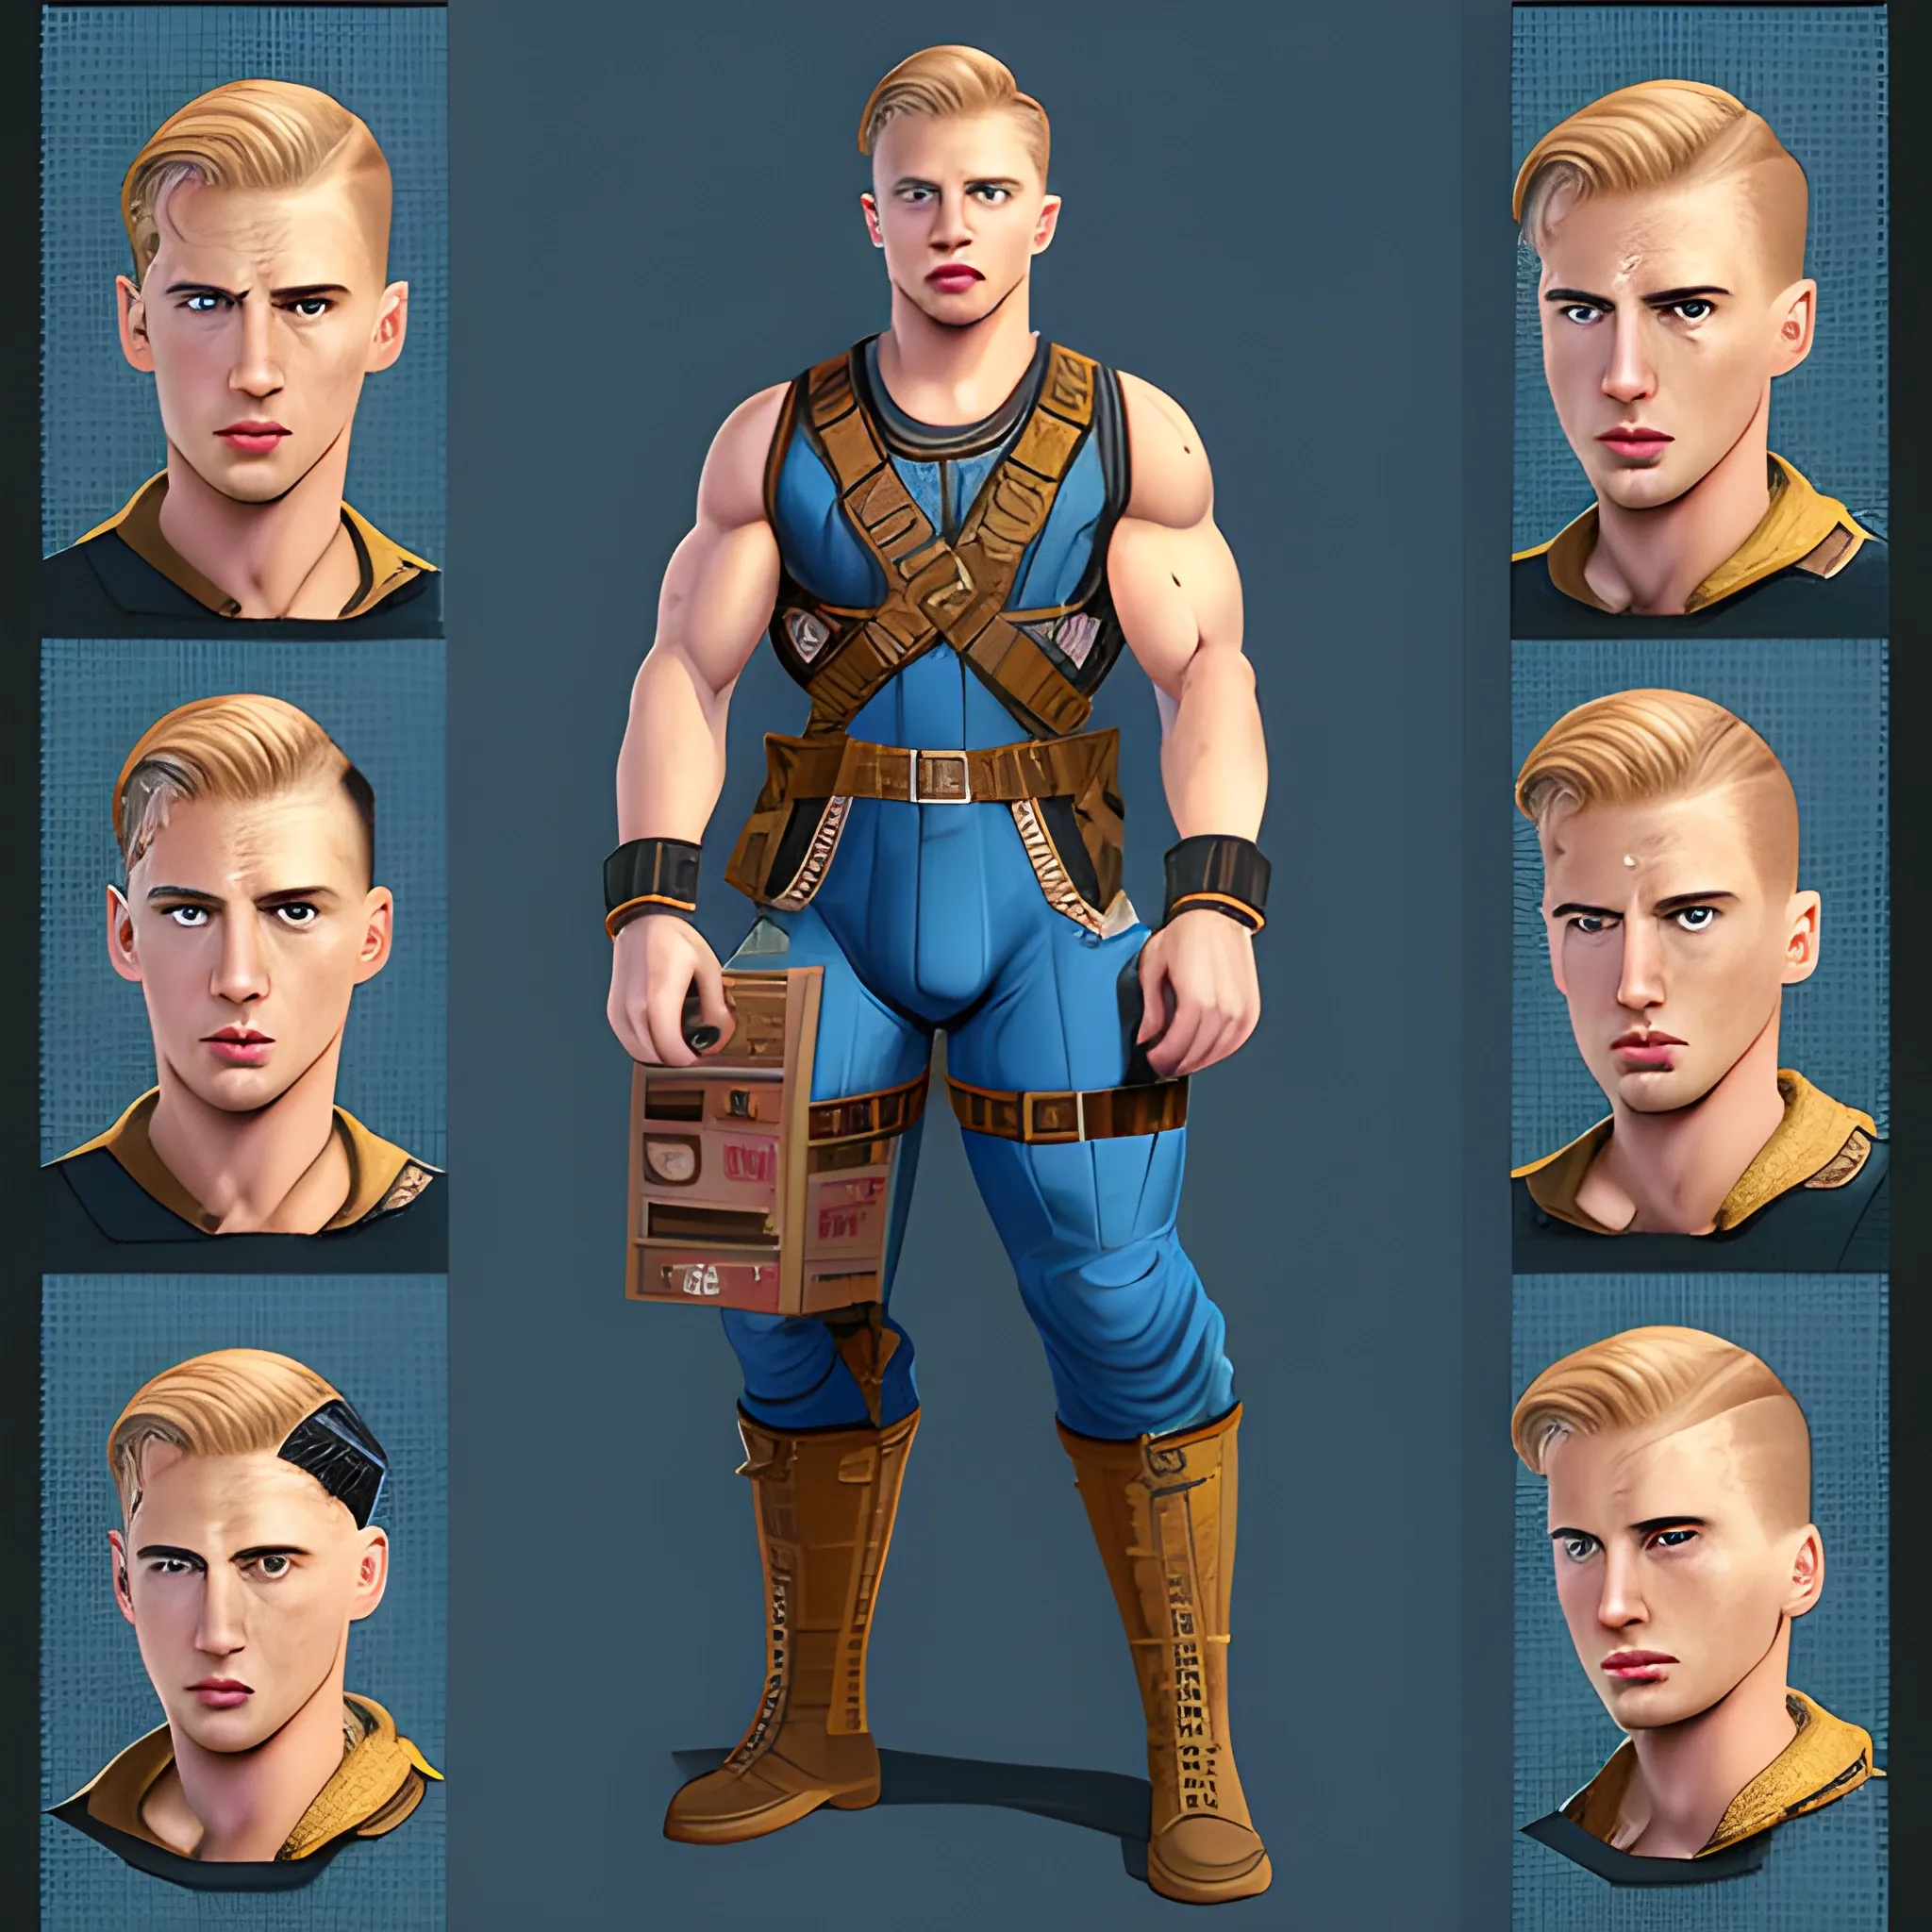 In the style of fallout 1, (masterpiece), (portrait photography), pixel art, (portrait of 20 years old Caucasian male), no makeup, muscles, harness outfit made out of straps, average face, an average looking Caucasian man, blonde hair, (blue eyes), (full body), Centered image, character sheet, concept art full body image